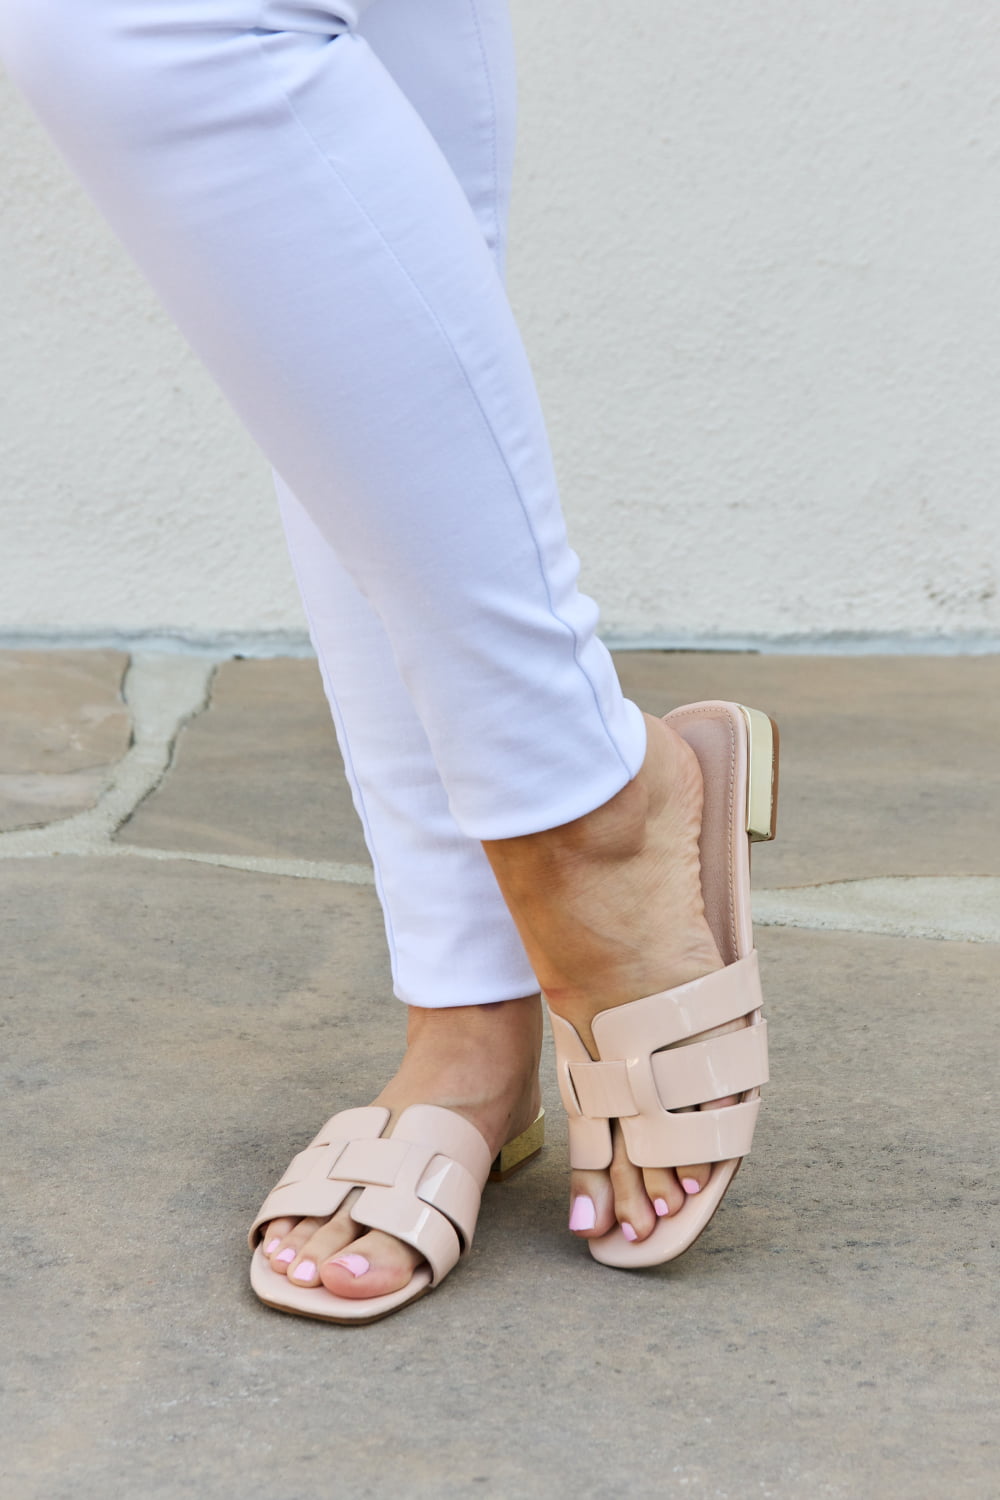 Everyday Sandals in Cream Shoes RYSE Clothing Co. Cream 6.5 